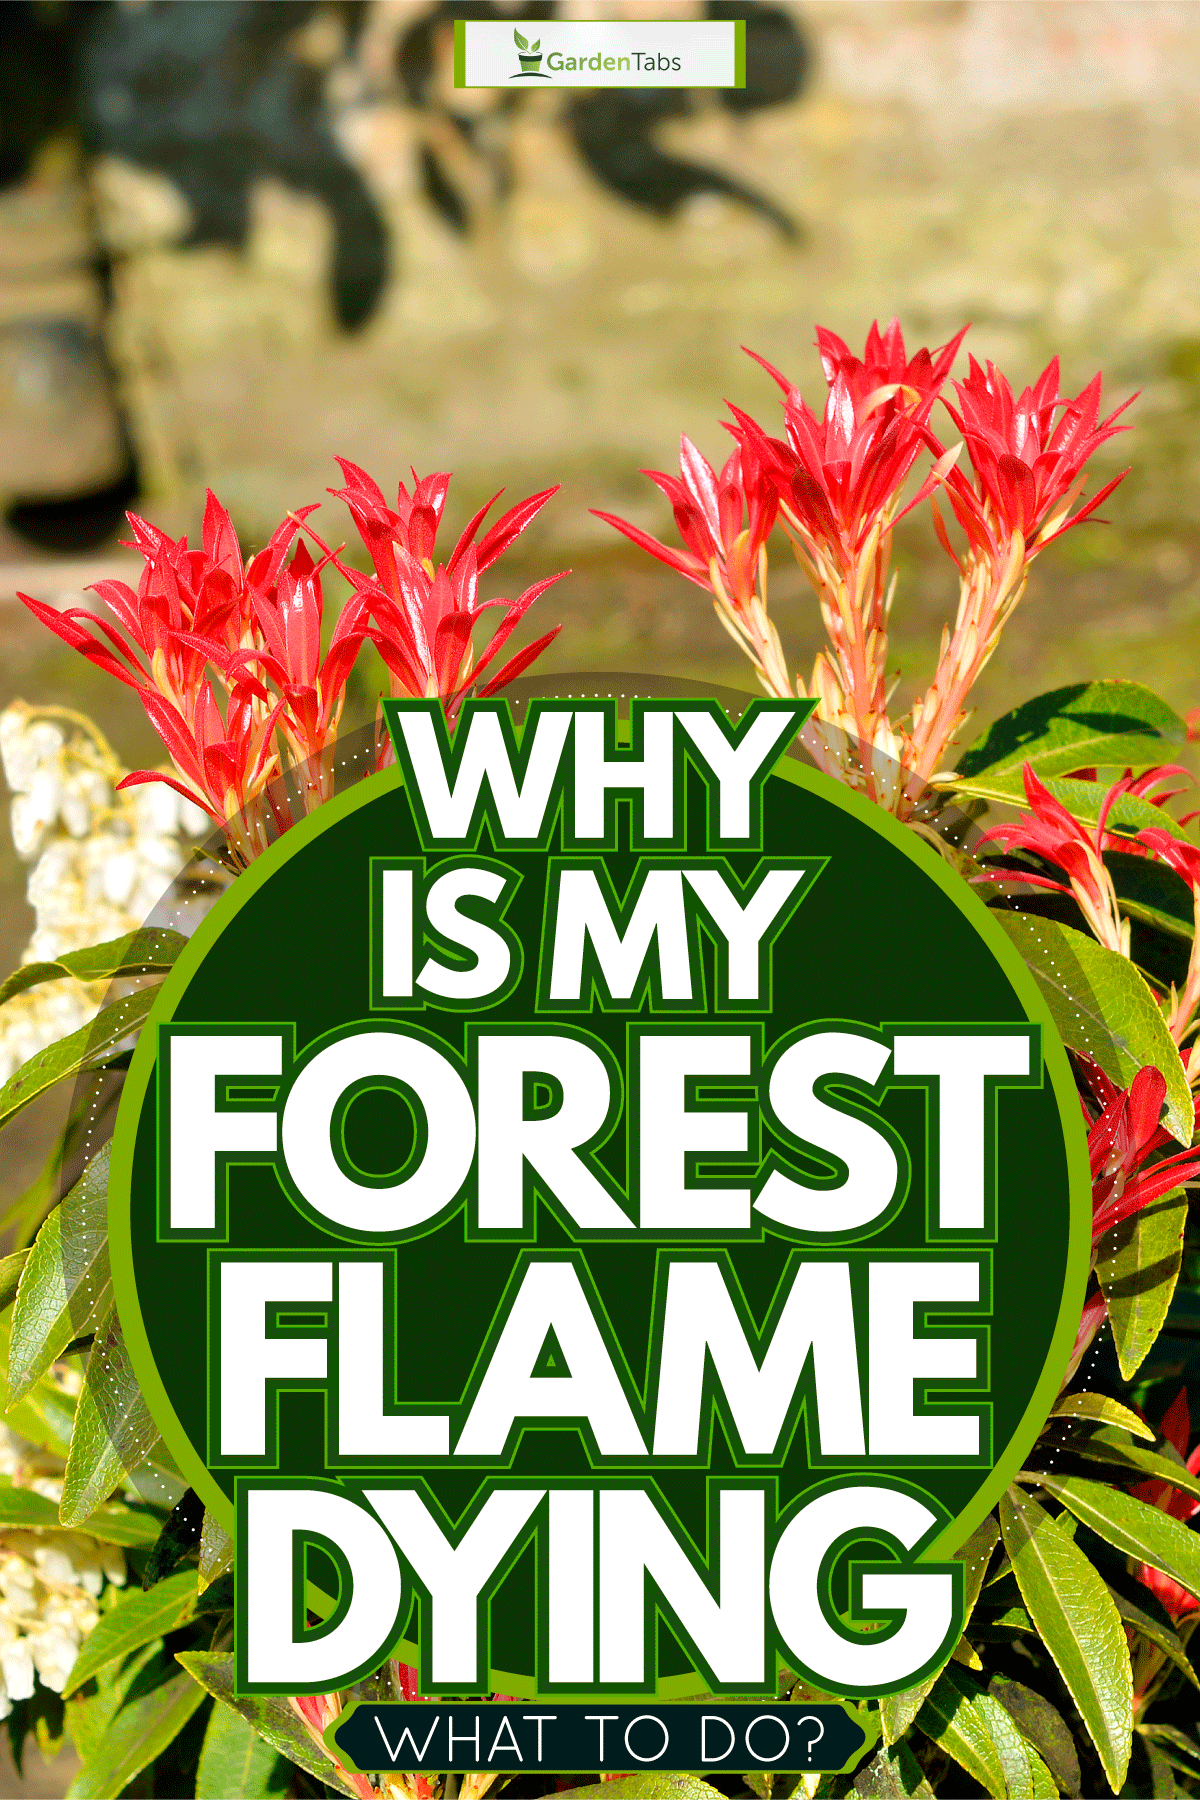 Stunning blooming forest flame plant, Why Is My Forest Flame Dying - What To Do?